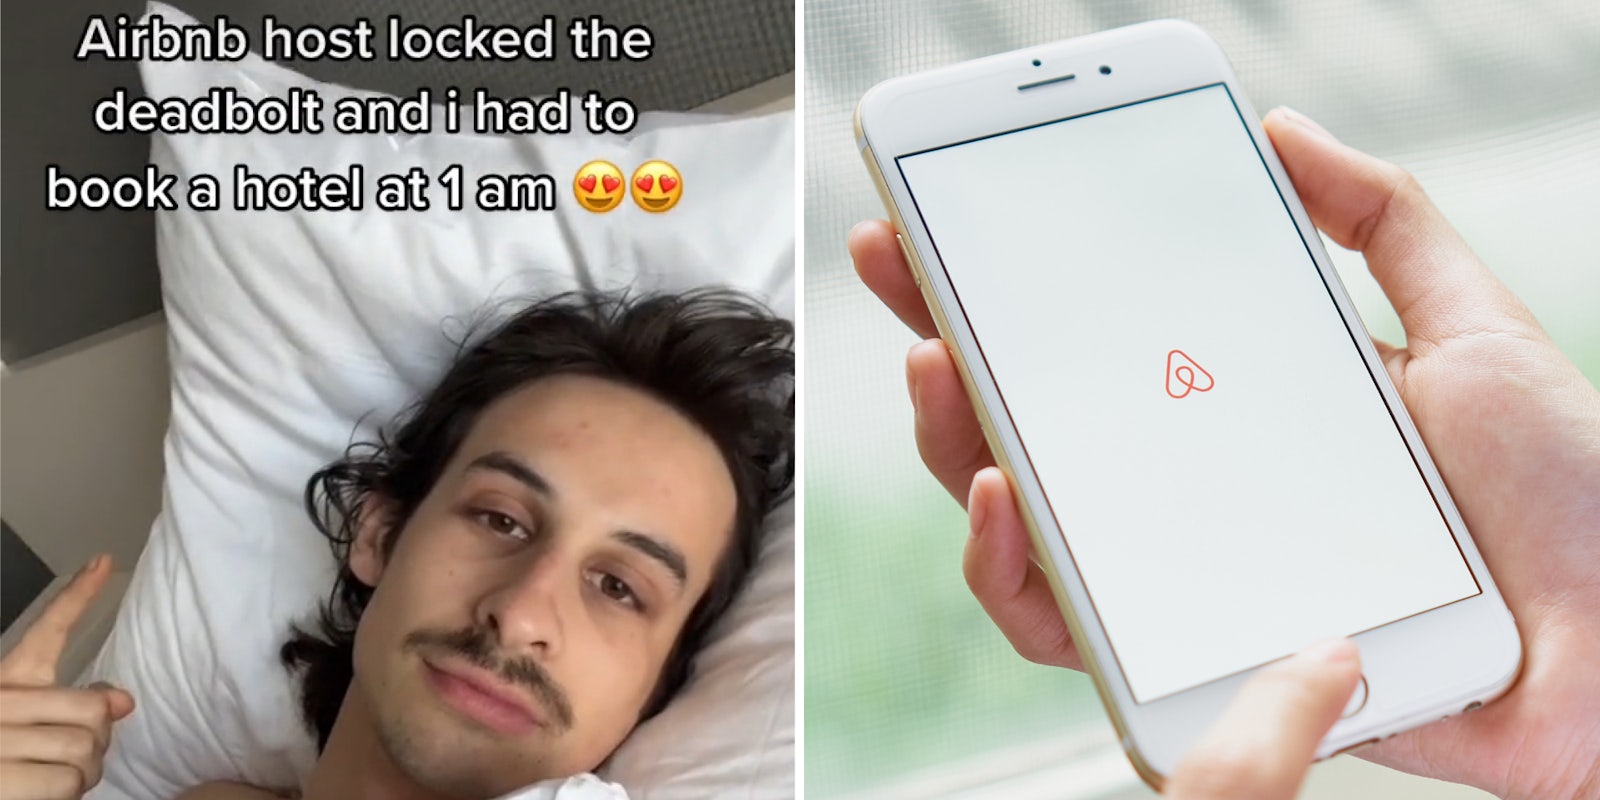 man on hotel bed pointing to caption 'Airbnb host locked the deadbolt and i had to book a hotel at 1 am' (l) hand holding phone with Airbnb logo on screen (r)